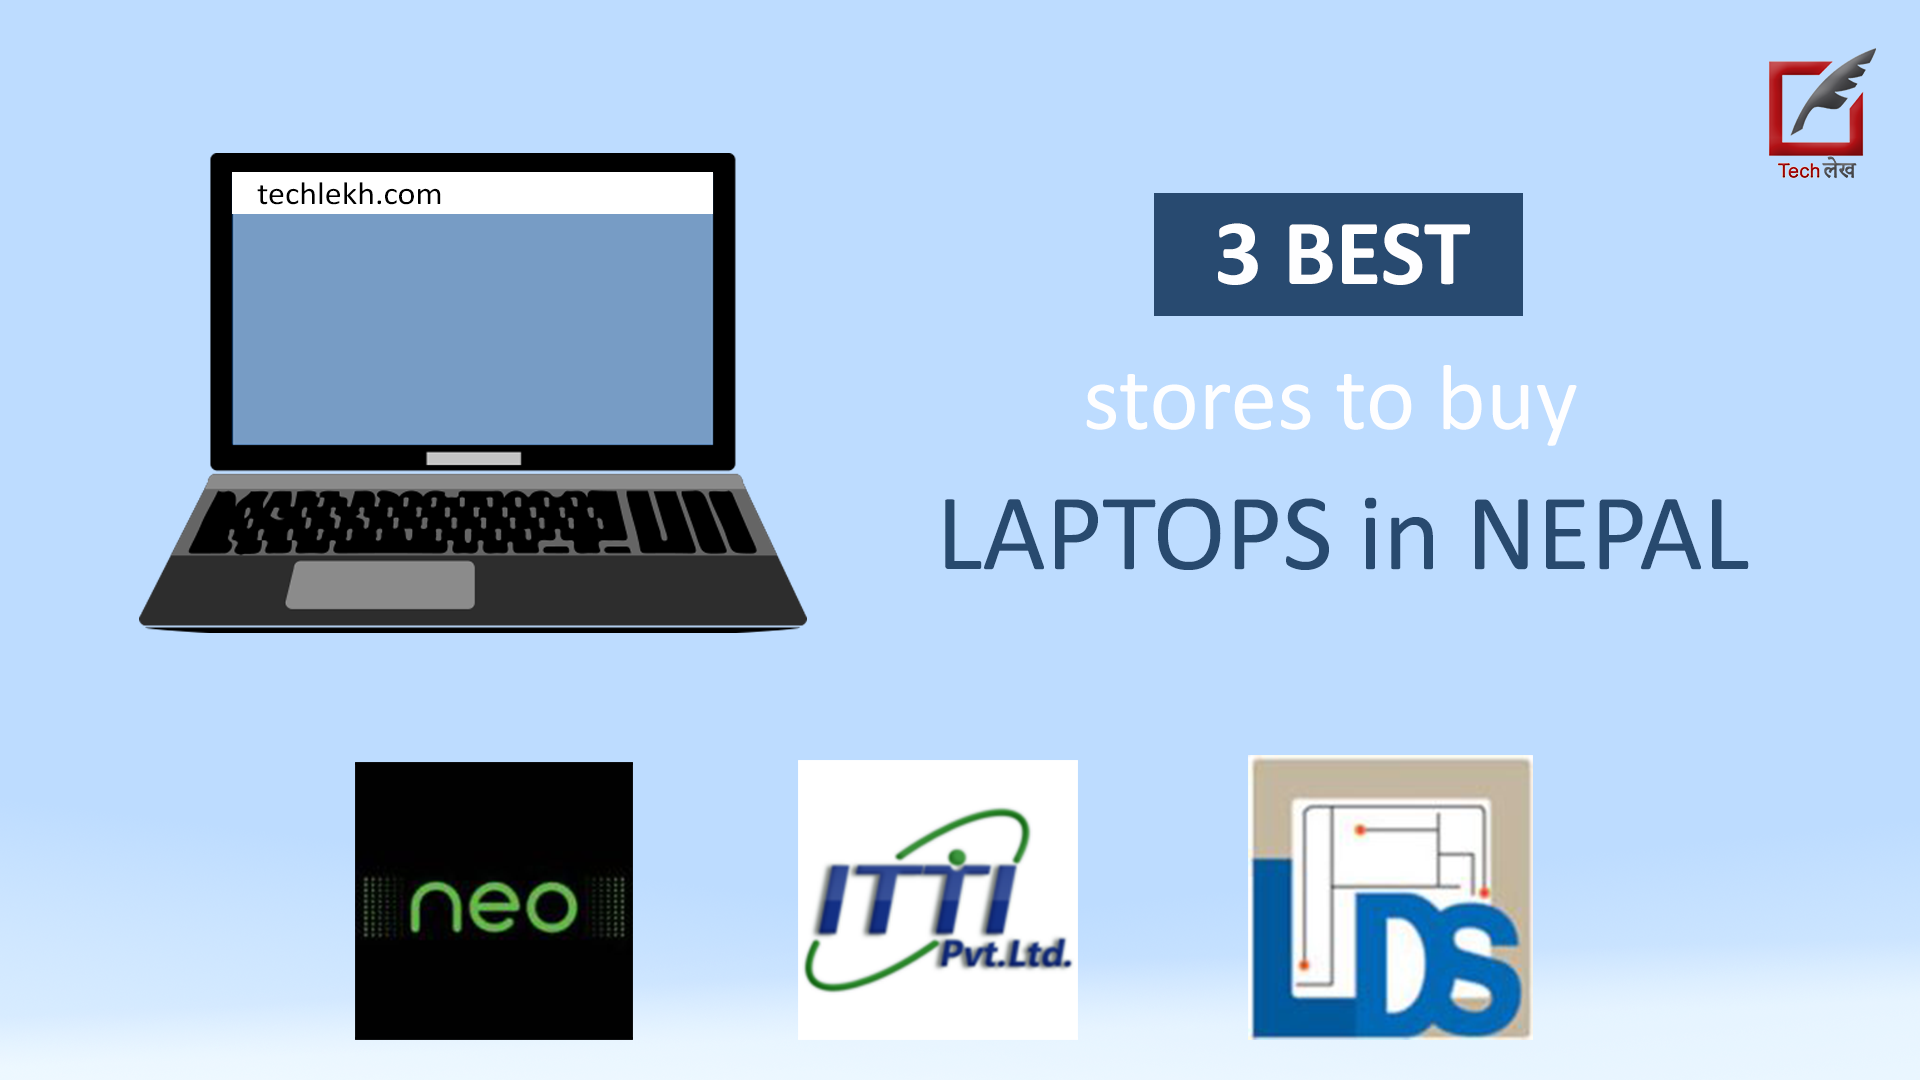 3 Best Stores to Buy Laptops in Nepal